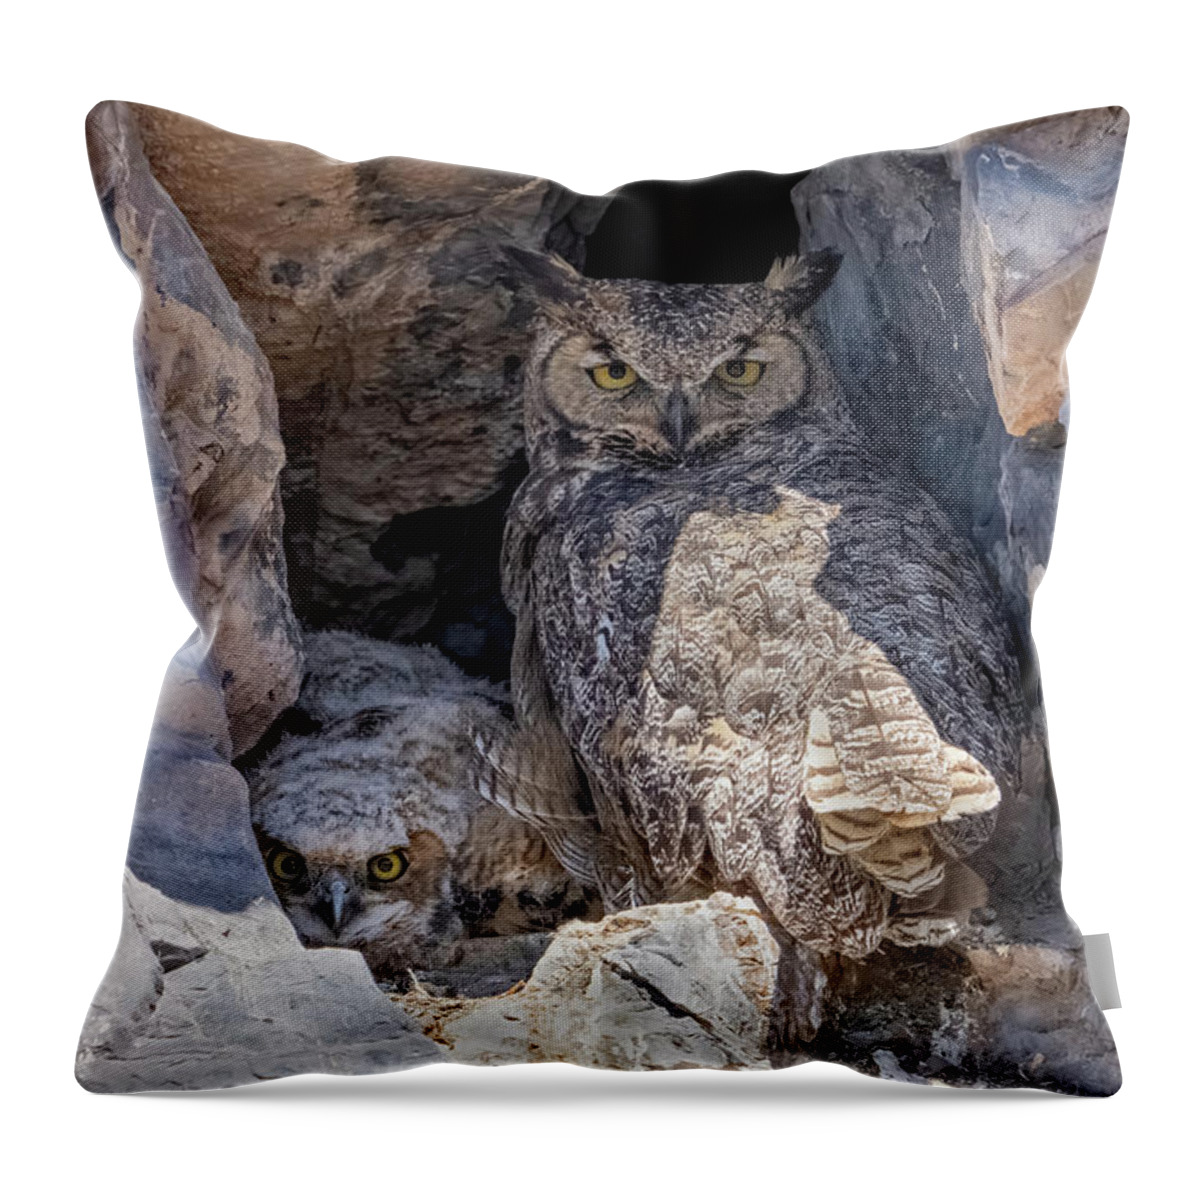 Owl Throw Pillow featuring the photograph Great Horned Owl Nest by Wesley Aston